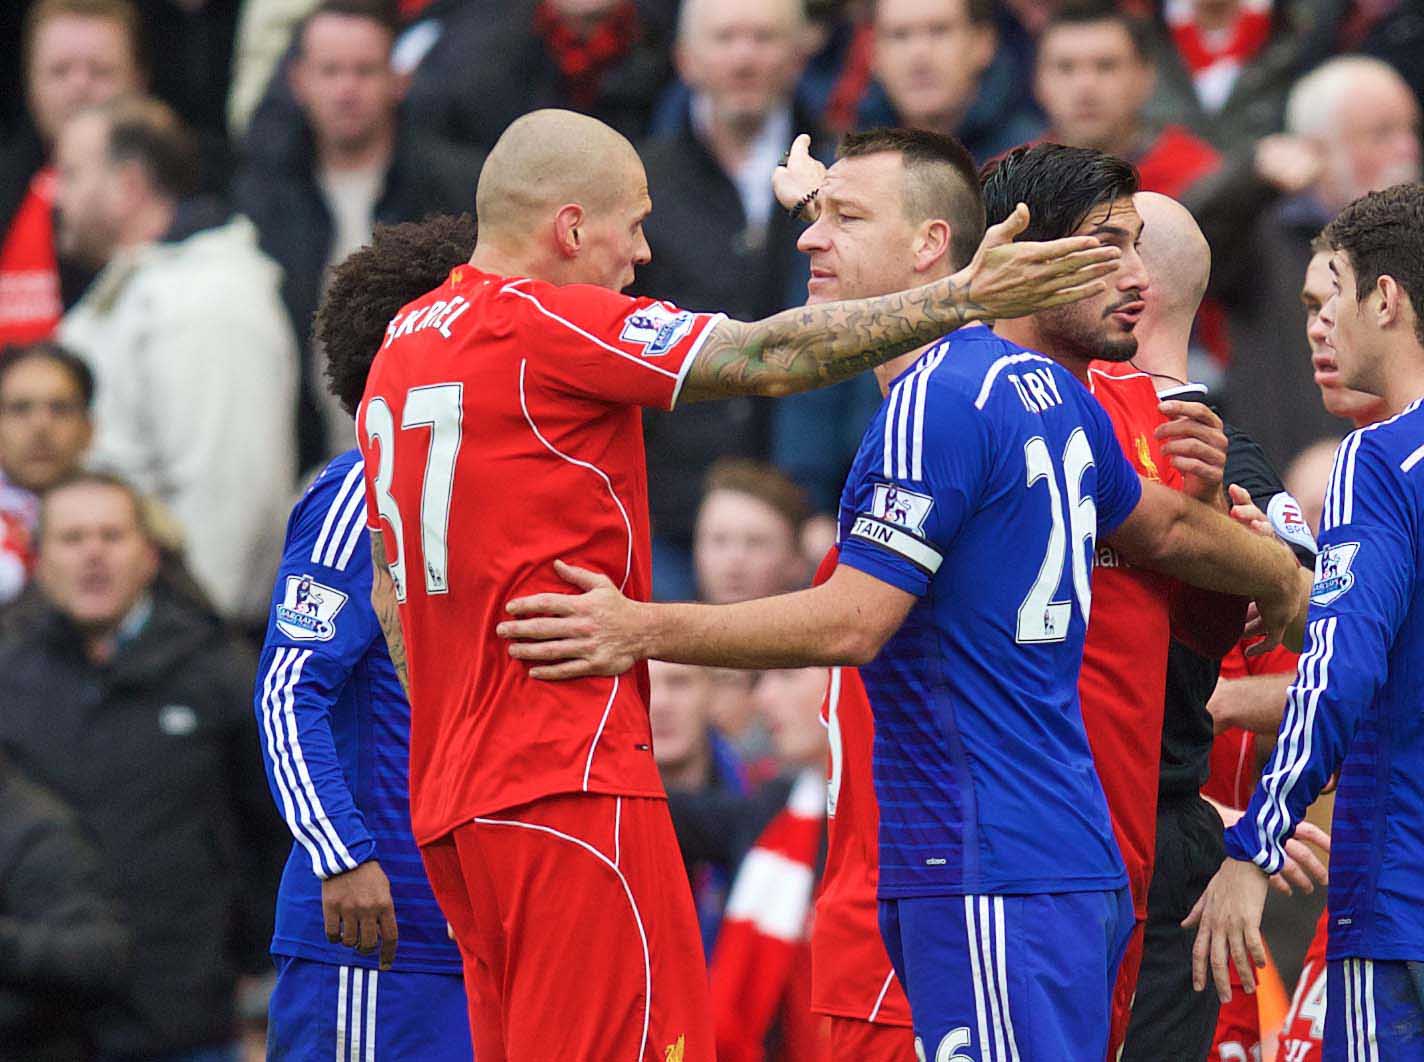 THE GUARD OF HONOUR AND “CLASSY” LIVERPOOL – IT’S JUST NOT FOR ME